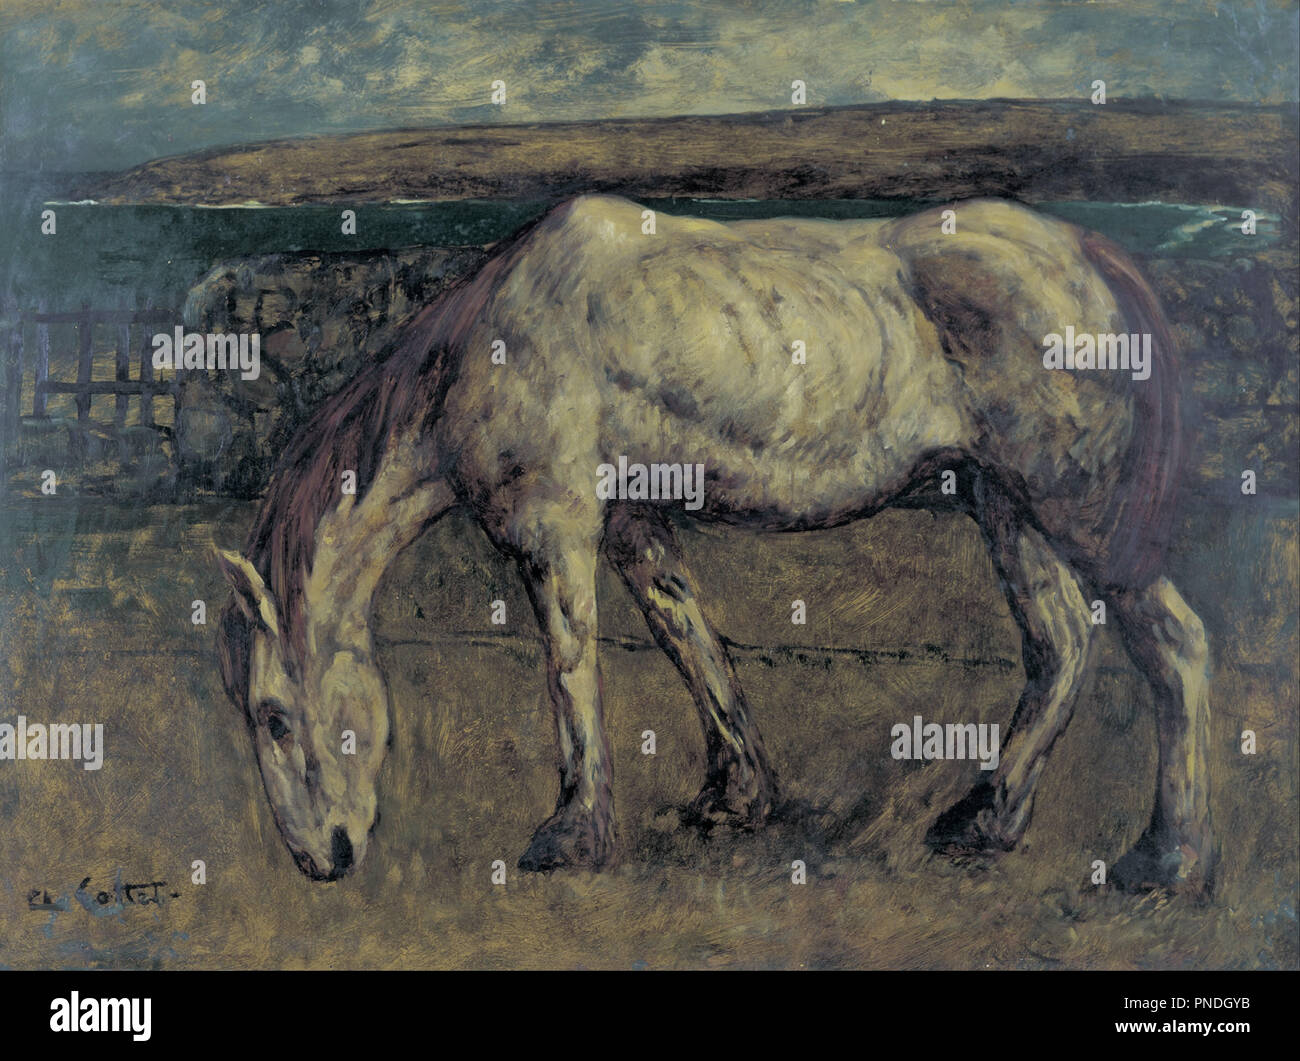 Old Horse in the Wasteland. Date/Period: 1898. Painting. Oil on panel. Height: 697 mm (27.44 in); Width: 937 mm (36.88 in). Author: CHARLES COTTET. Stock Photo